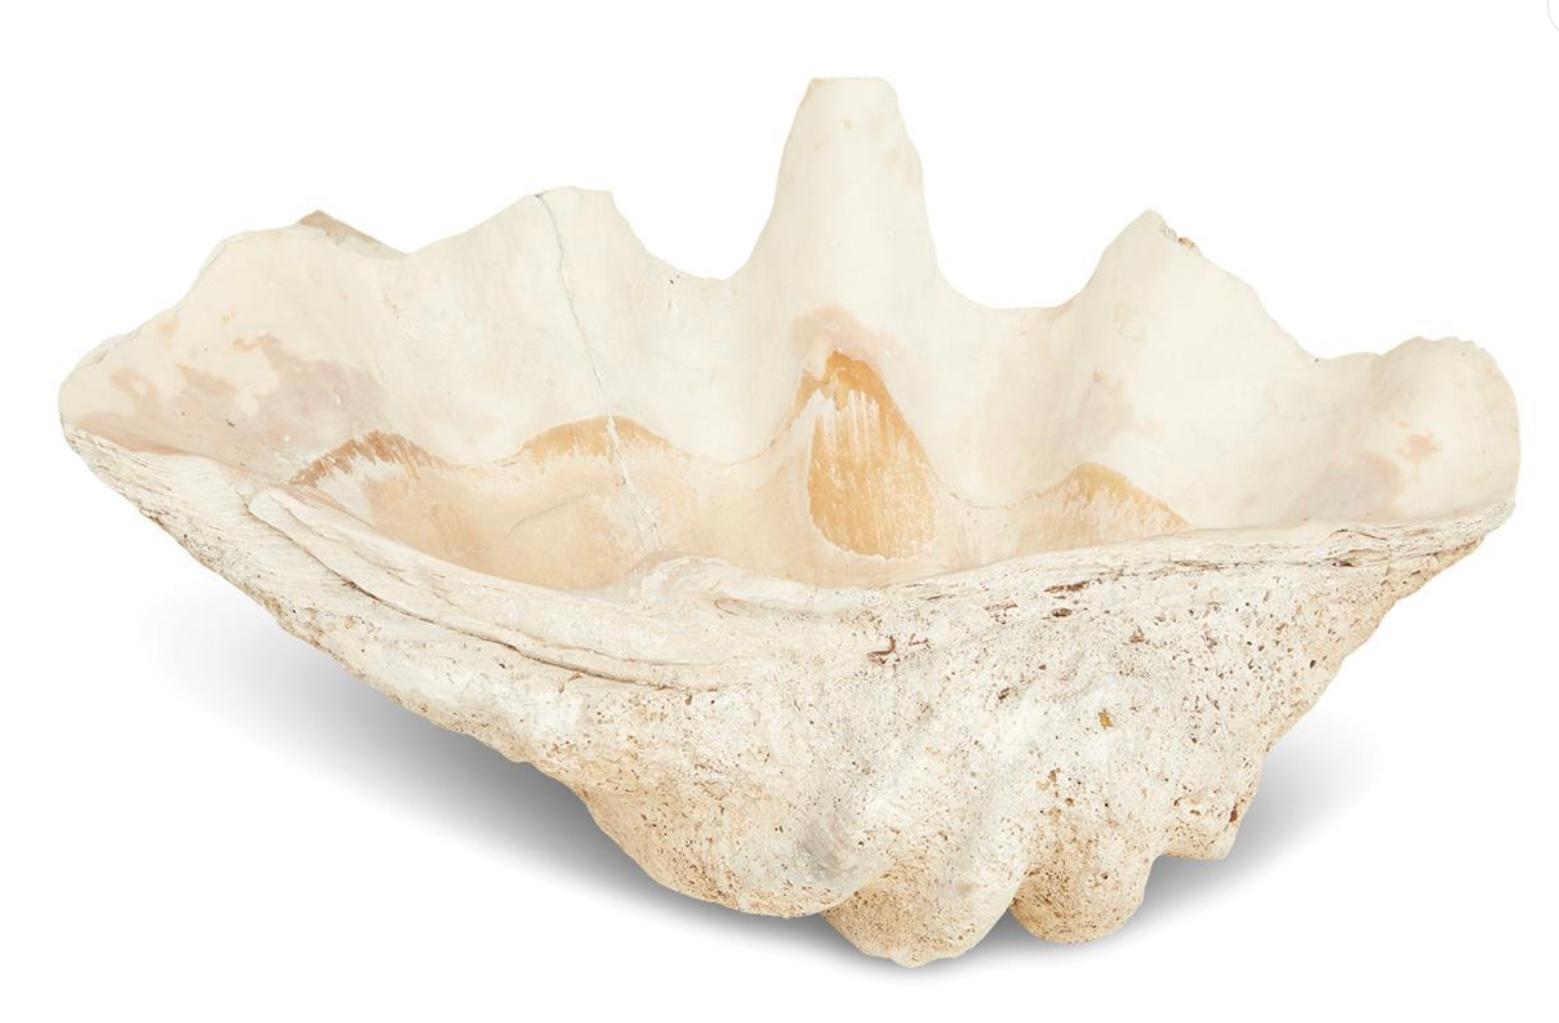 Authentic fossilized giant 34 inch natural clam shell. Clam shell has iconic sculptural form  and sea inspired colors and textures. 